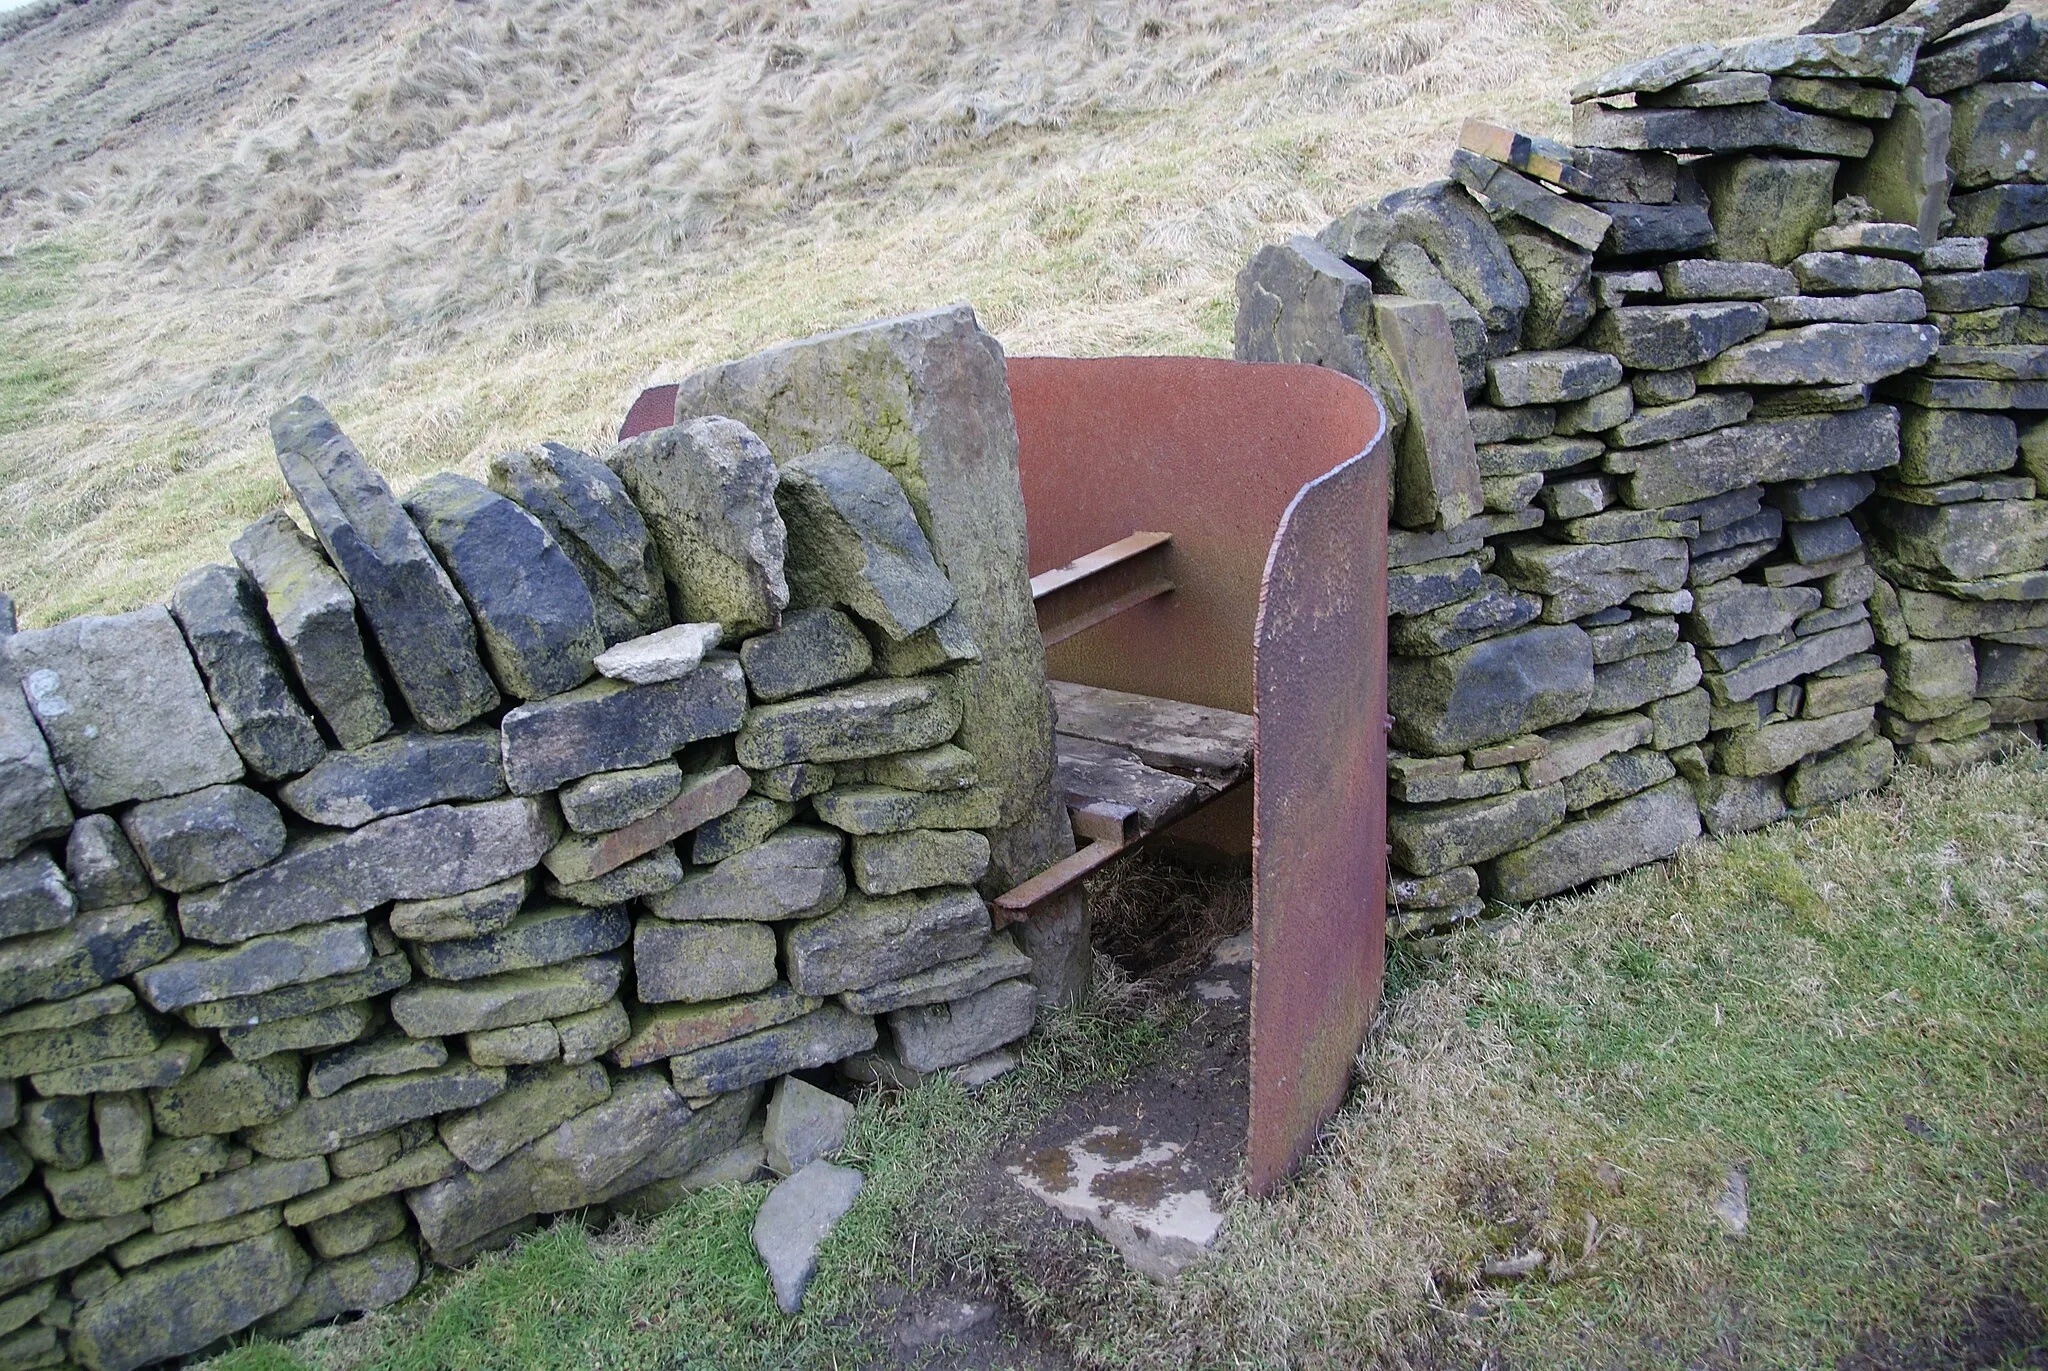 Photo showing: A different sort of stile I haven't seen one of these before. It looks like it has re-used some metal from something else.